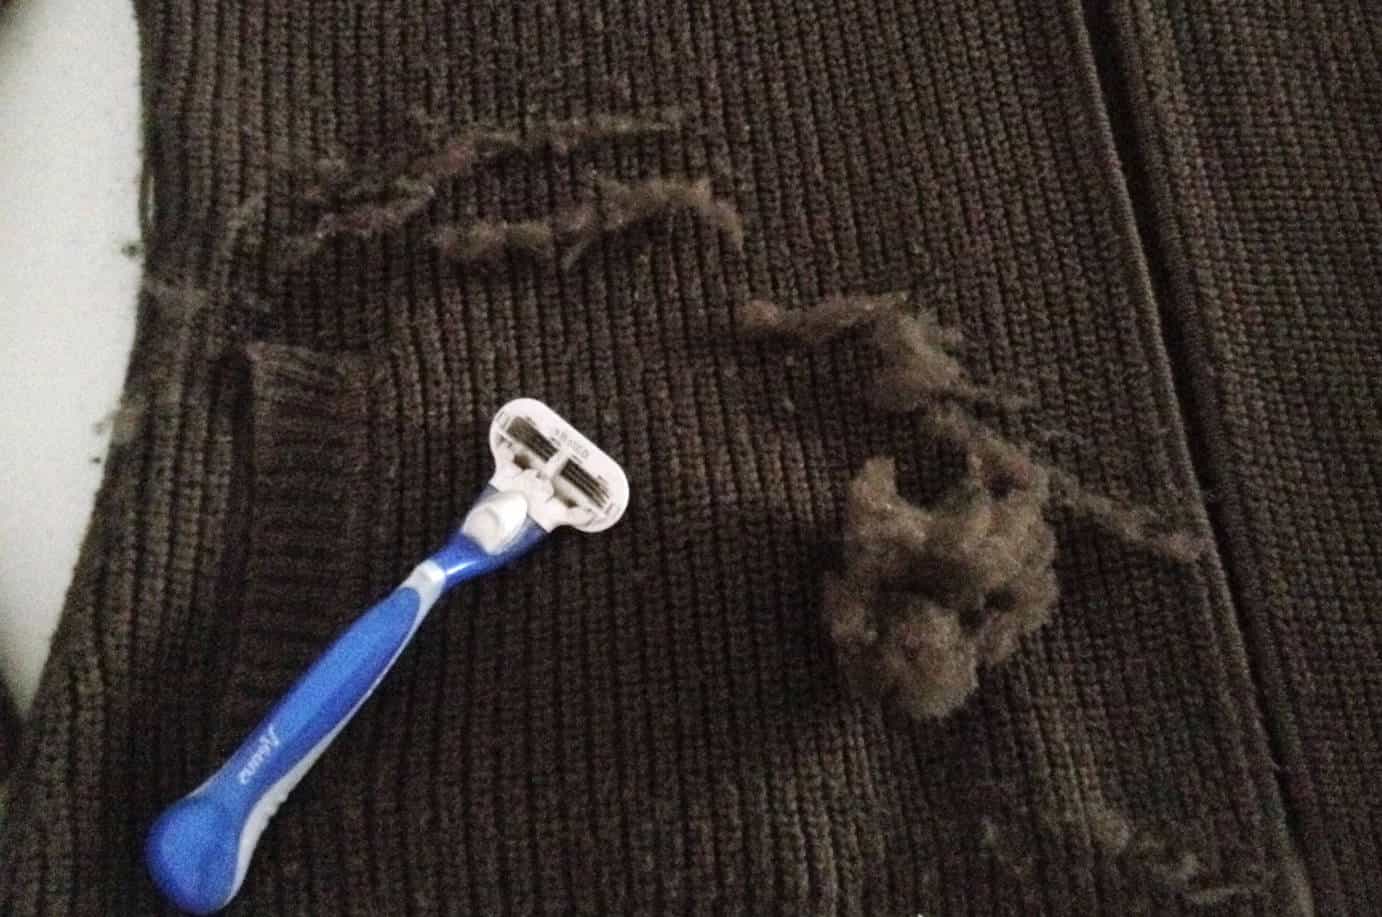 removing lint from clothing